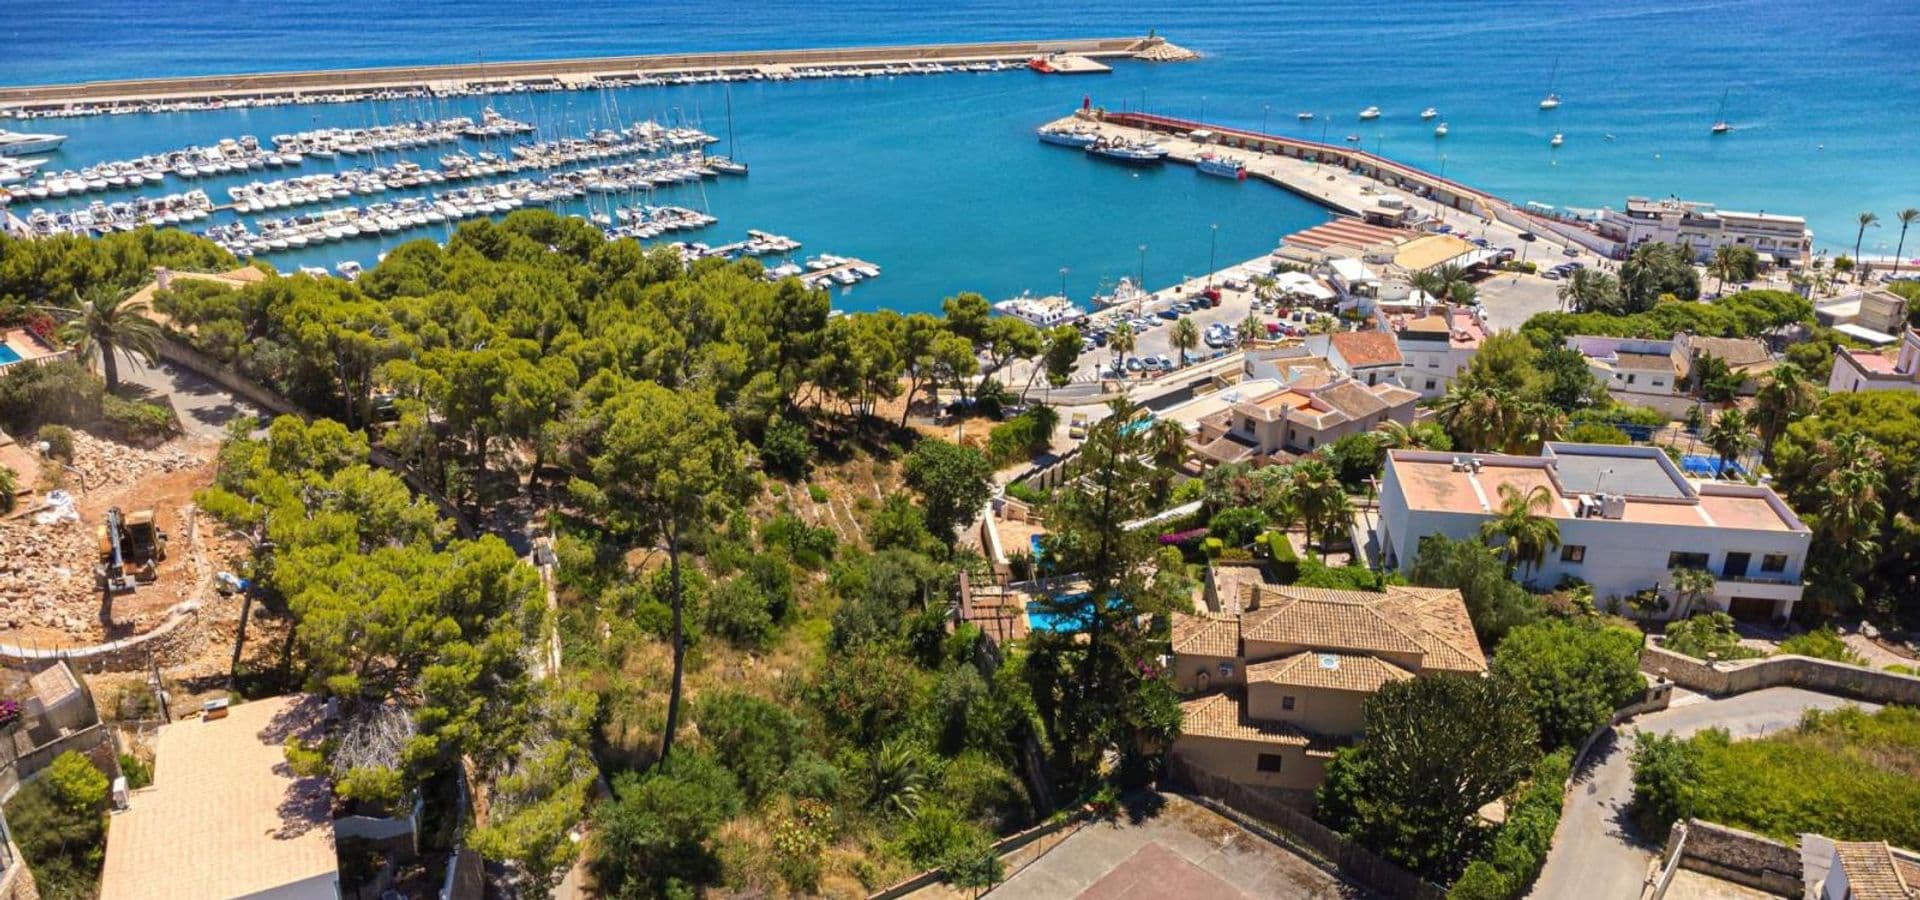 Ibiza-style property, renovated with the utmost of style. An idyllic place to enjoy the coastal lifestyle, located only a few metres from the sea in Javea, Alicante.